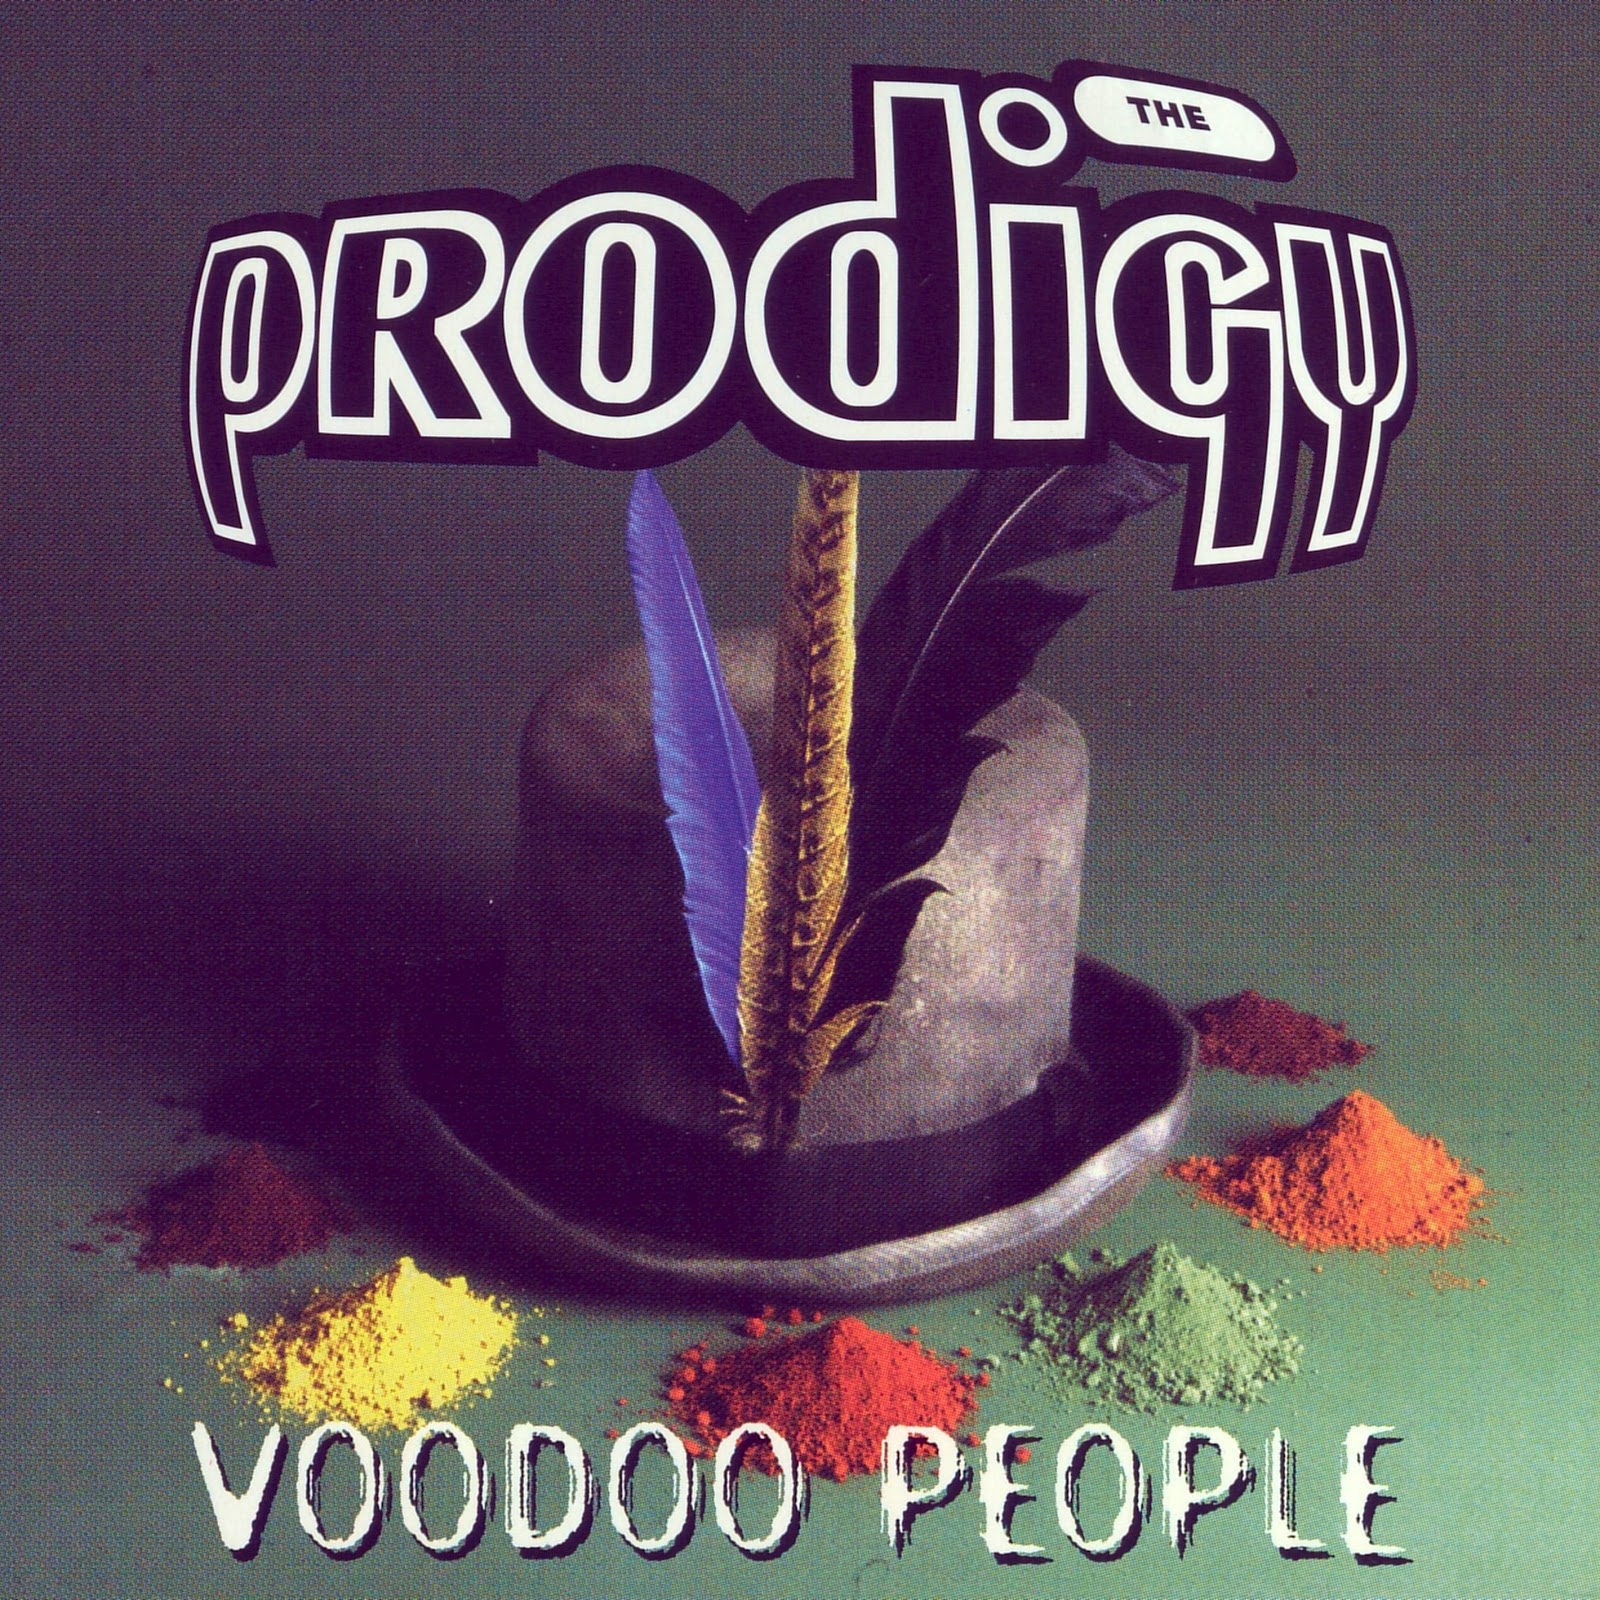 The Prodigy-Their Law: The Singles 1990-2005 full album zip